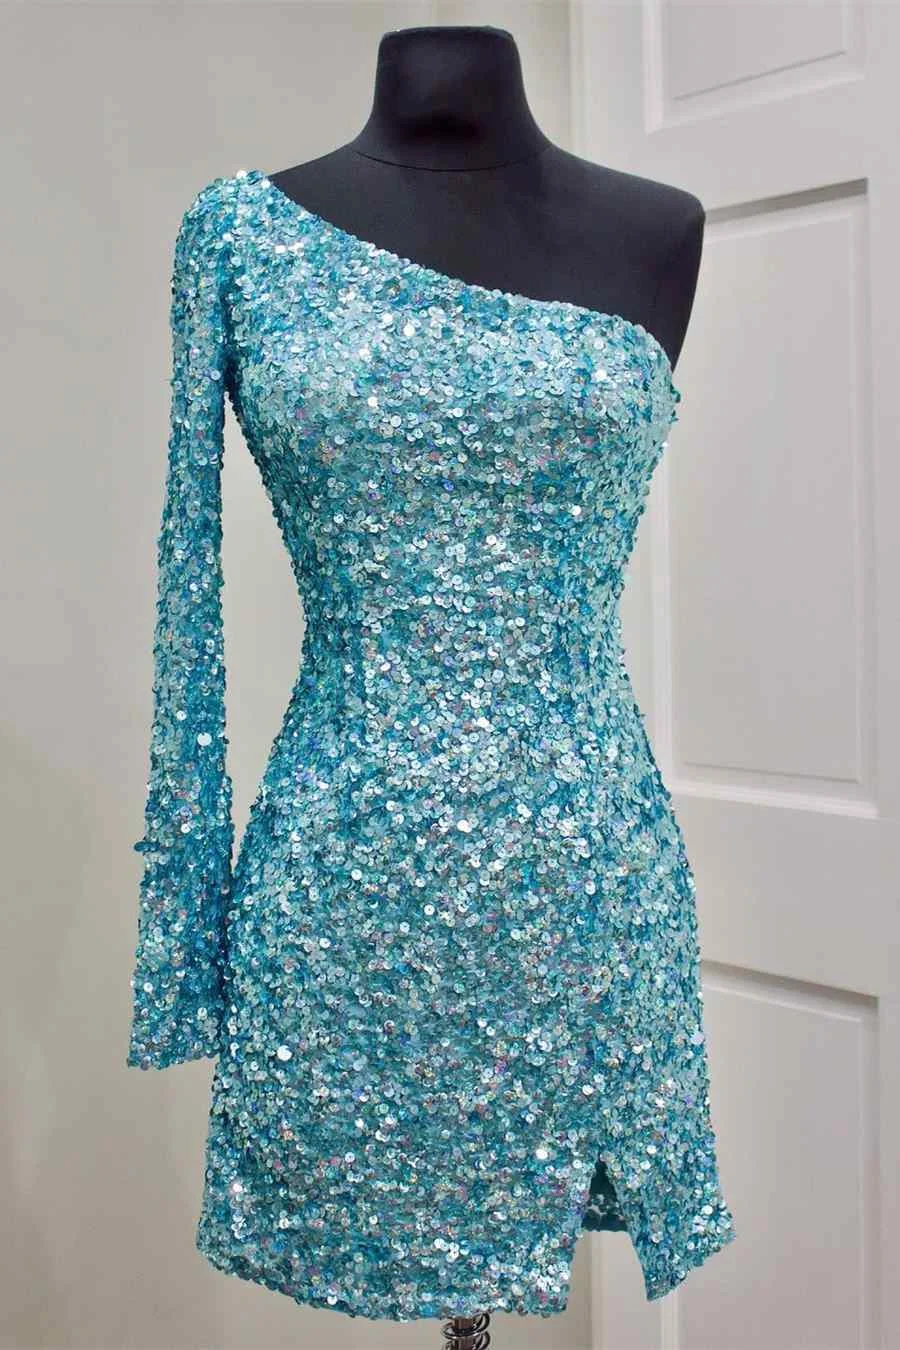 Daisda Stunning Long Sleeves One Shoulder Prom Dress Short With Sequins